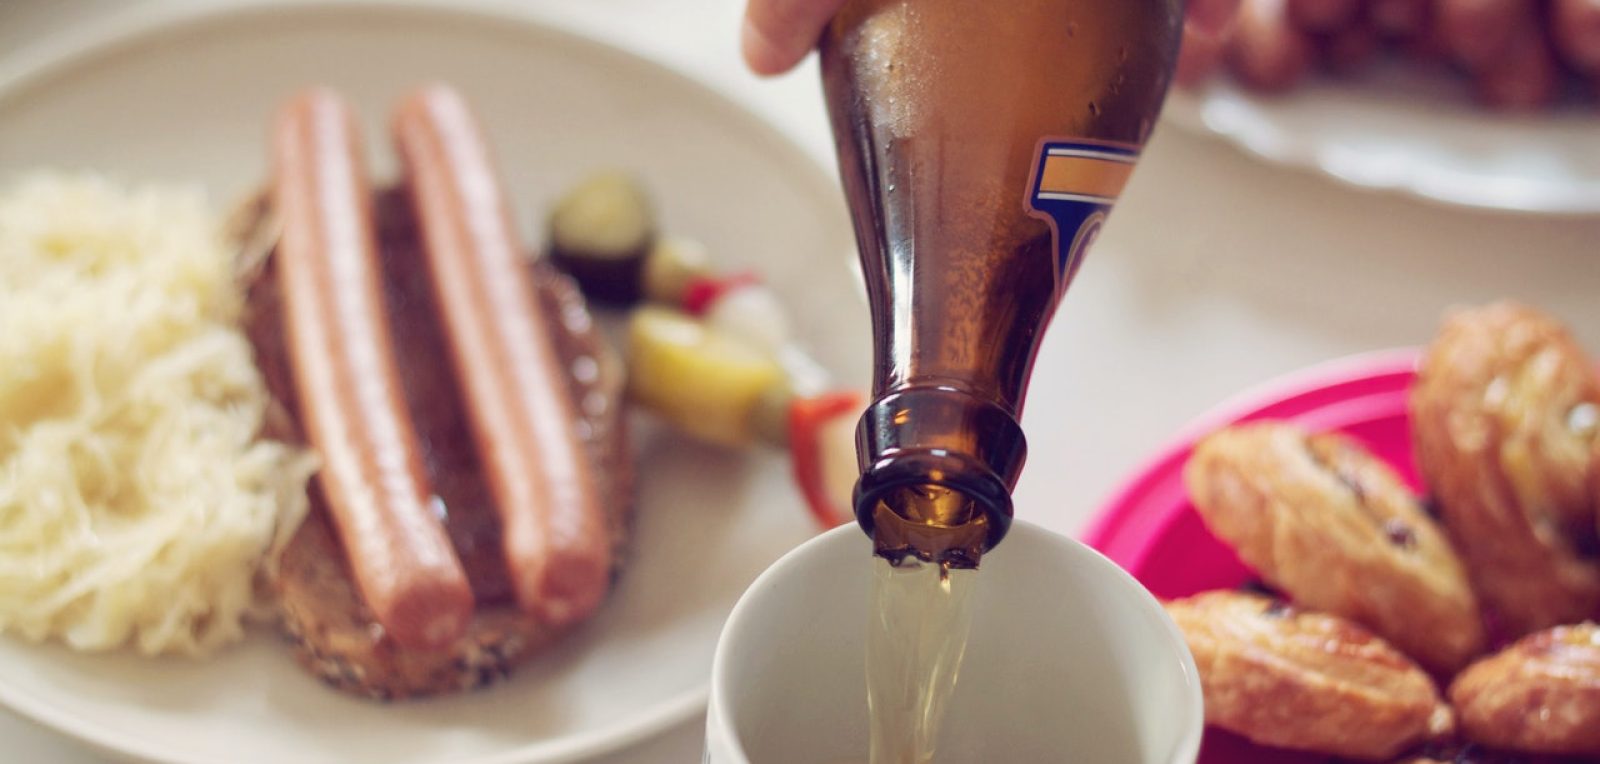 A German beer being poured in a ceramic mug. Two sausages sit on a plate in the bakcground.